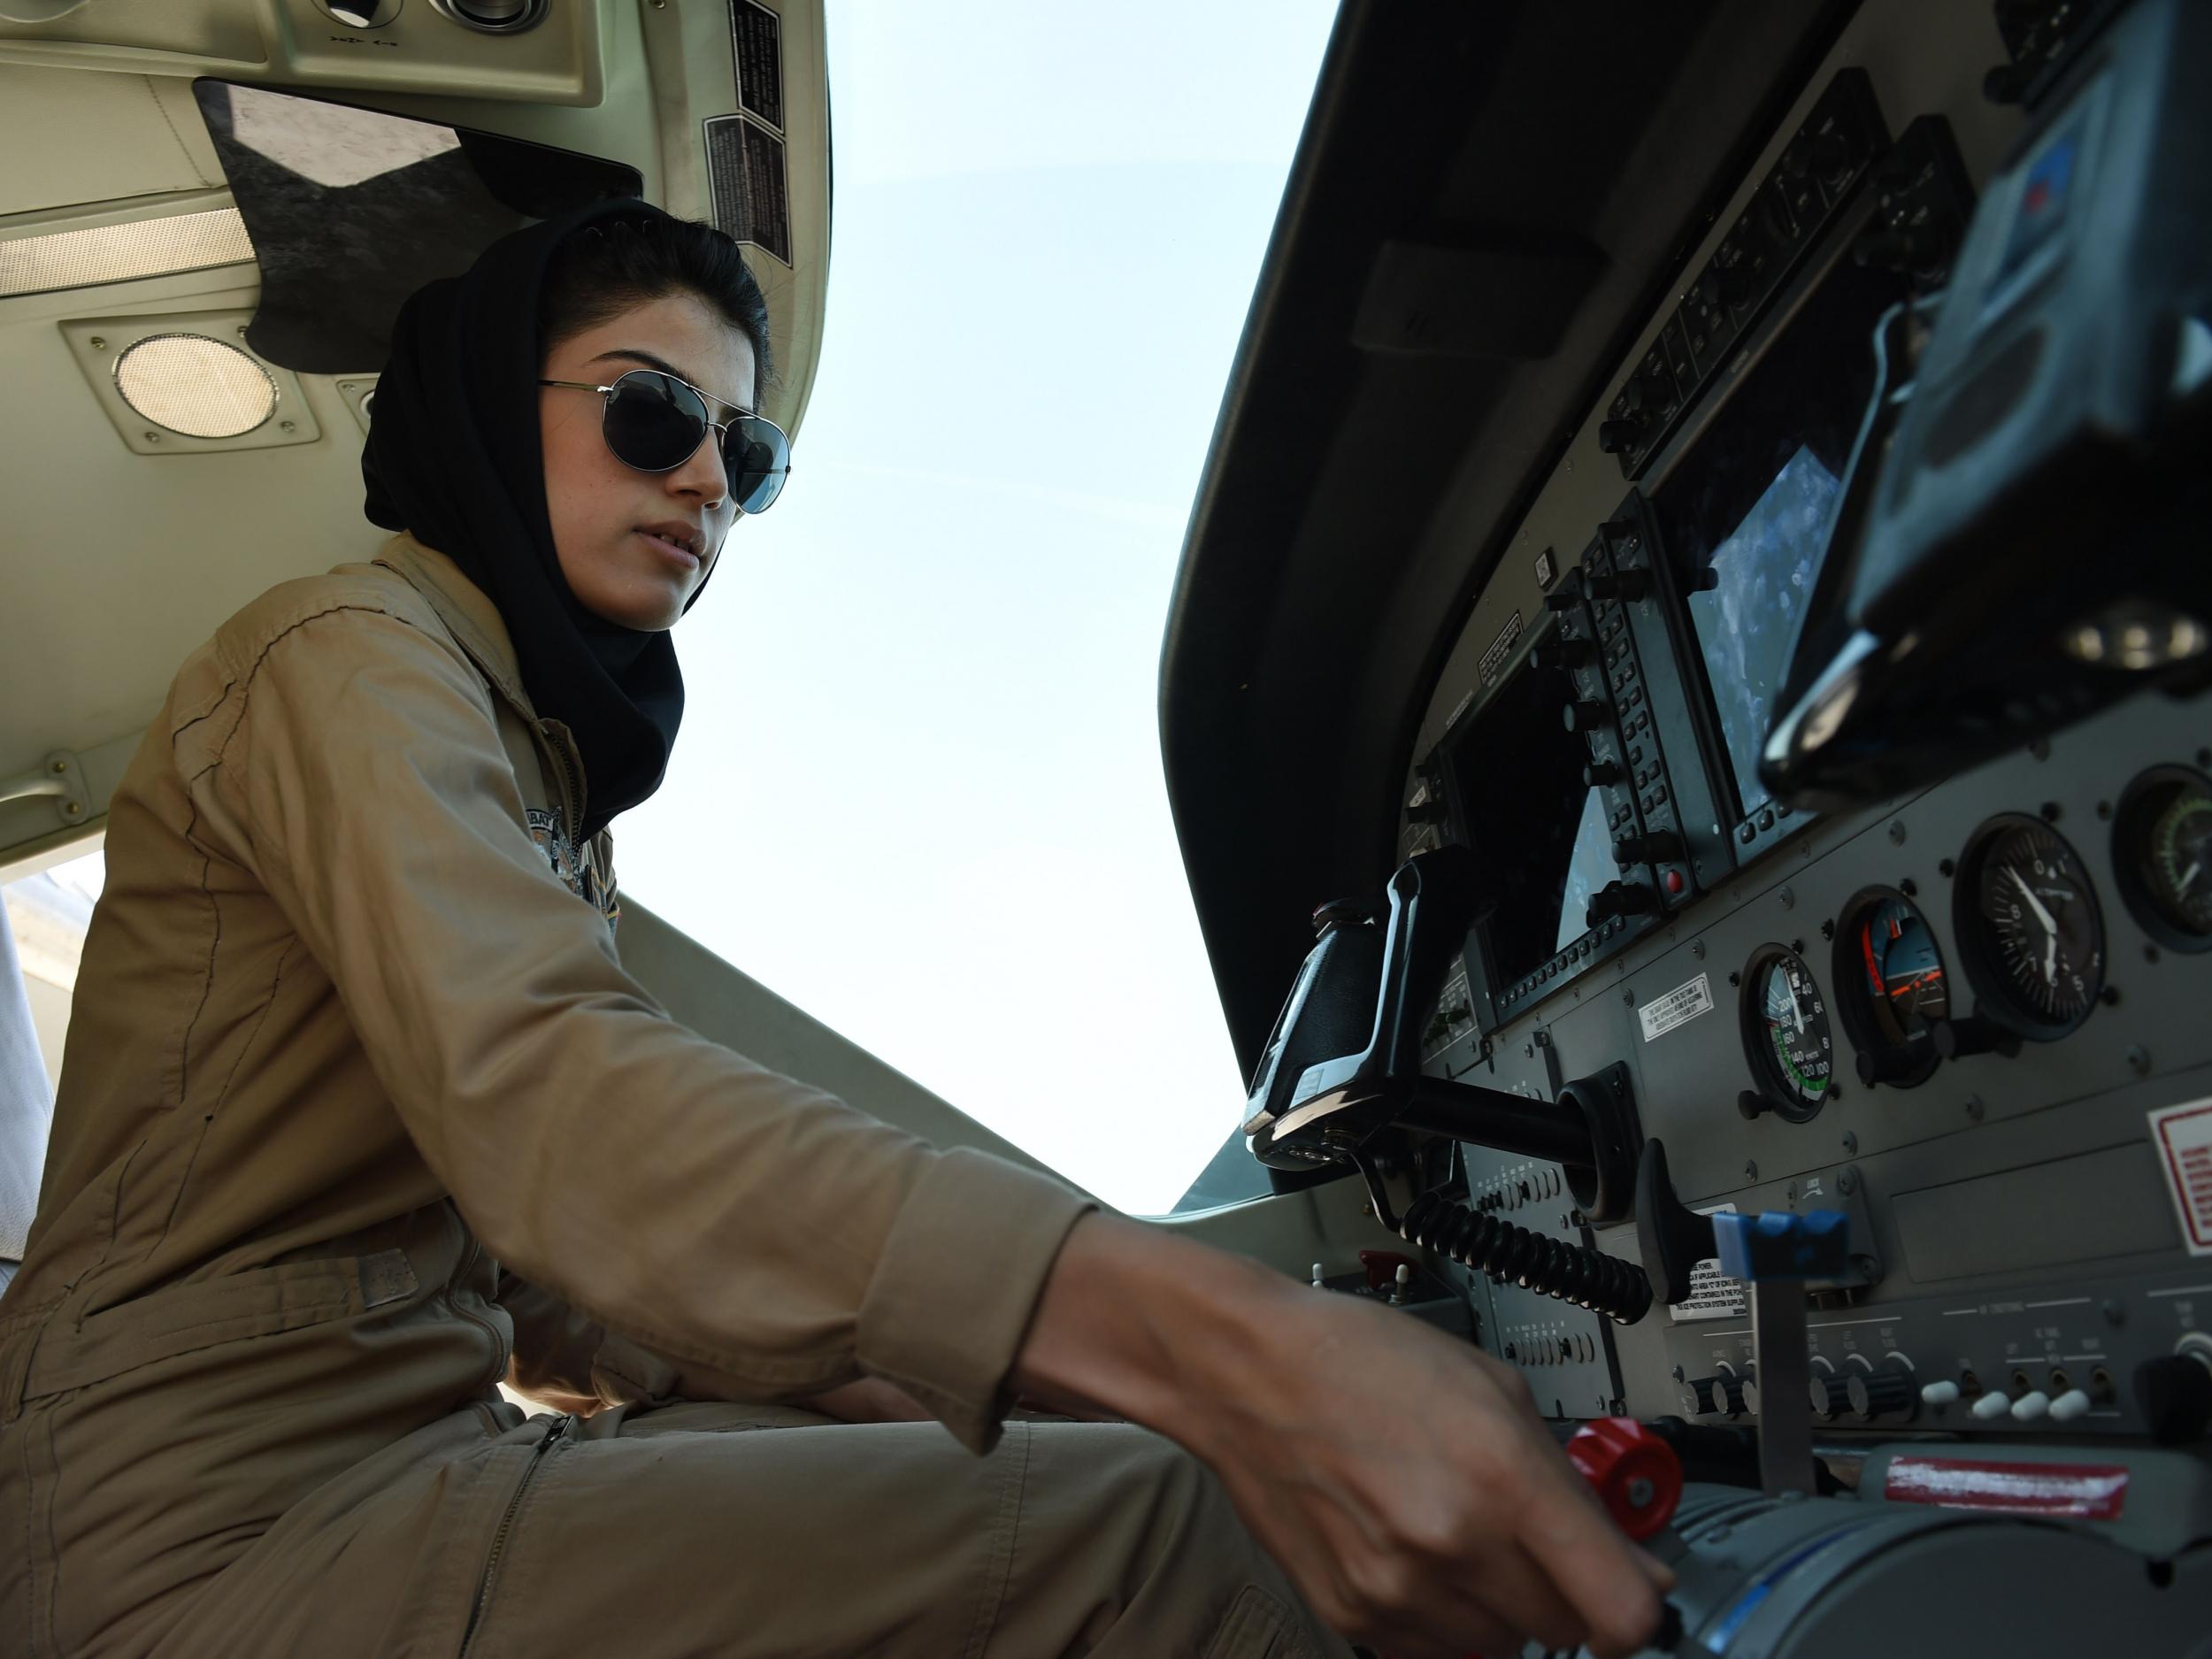 Niloofar Rahmani, who received threats because of her work, at the controls of an aircraft